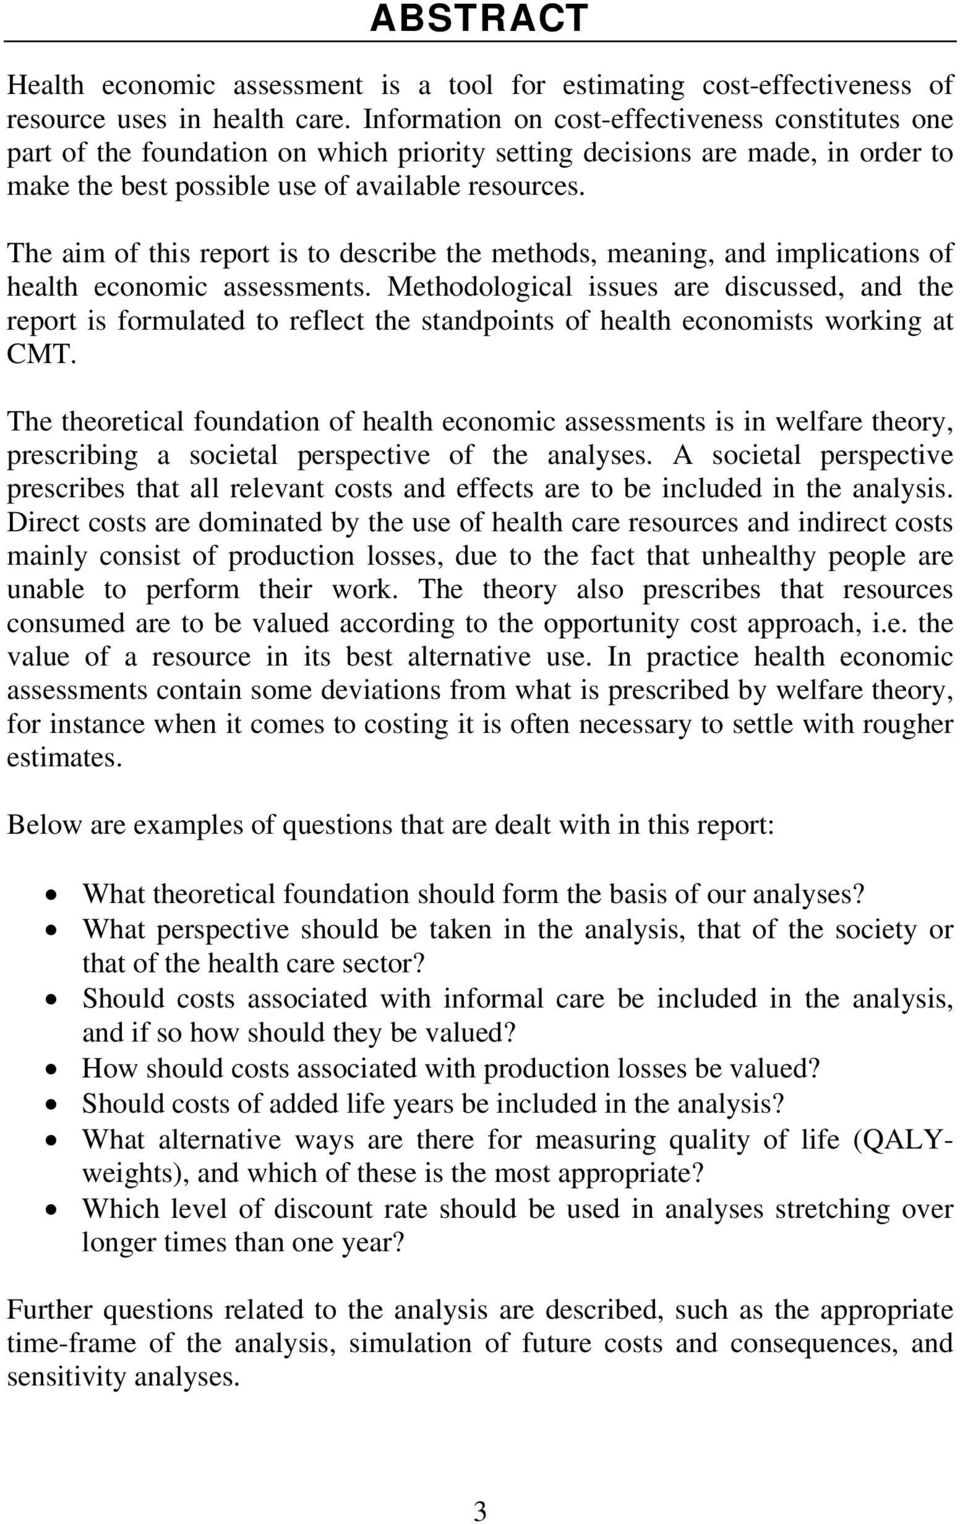 The aim of this report is to describe the methods, meaning, and implications of health economic assessments.